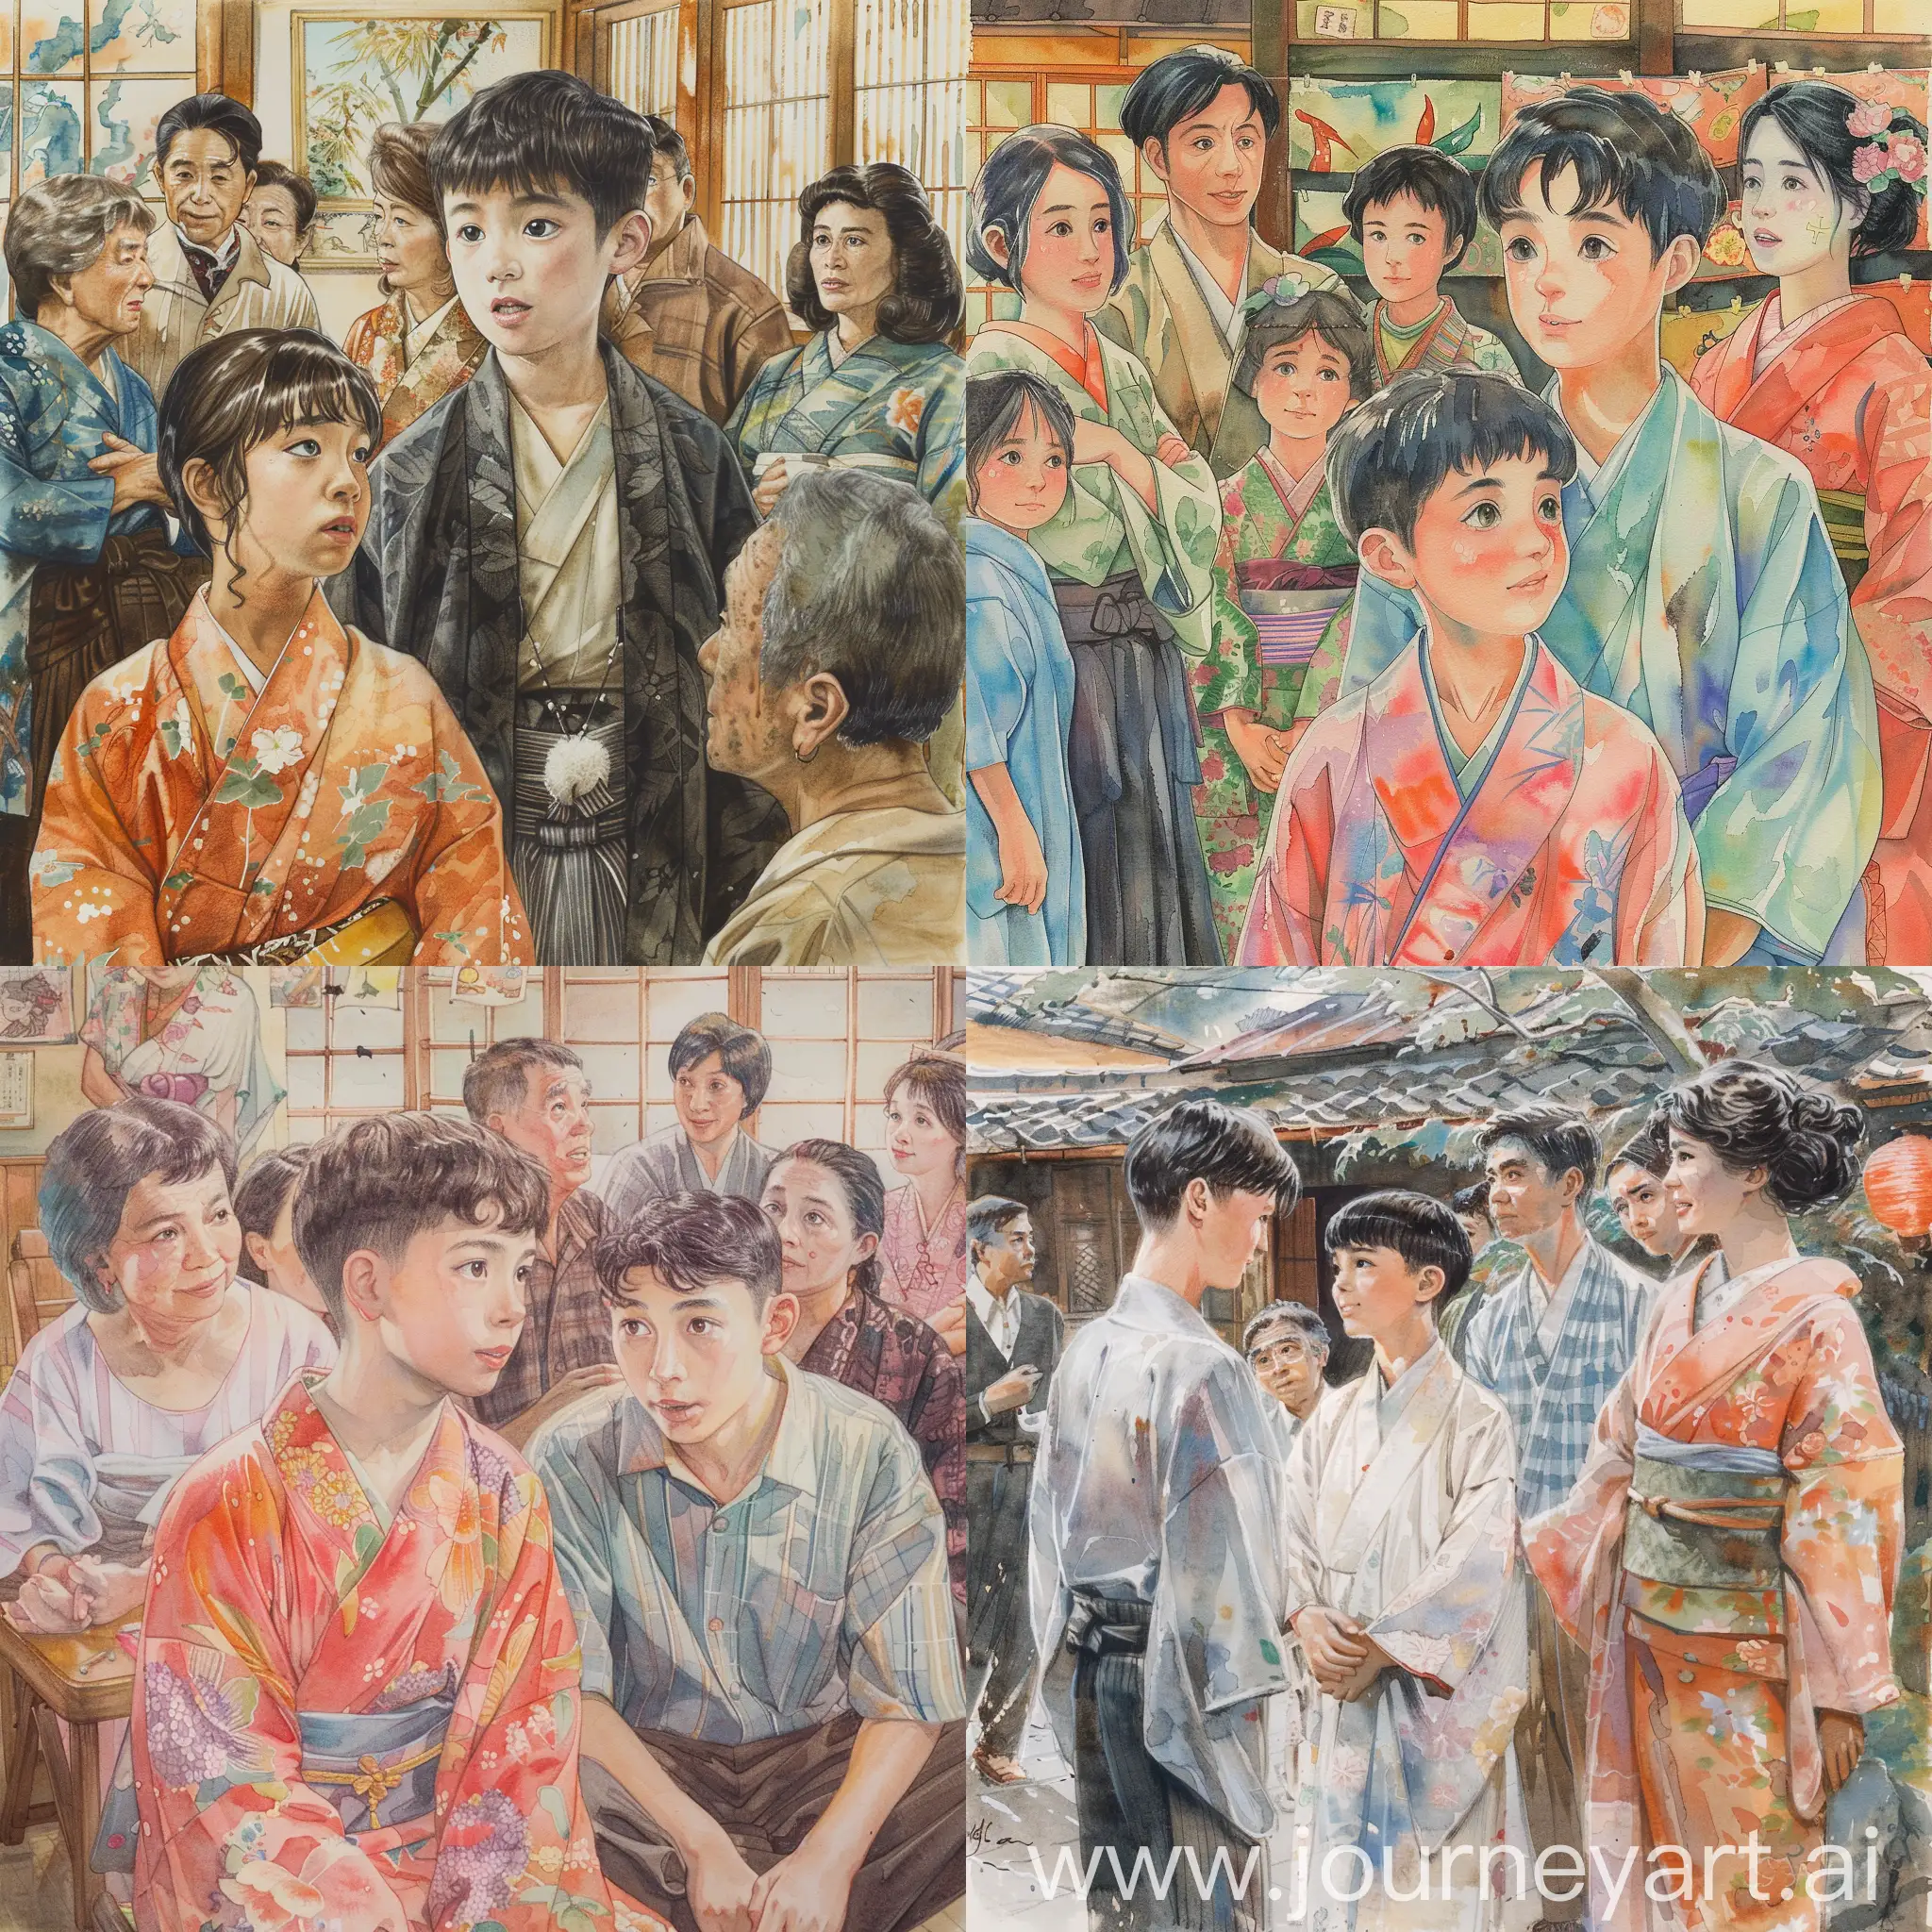 Japanese-Style-Serene-Perseverance-18YearOld-Boy-and-Servant-Woman-in-Kimono-Surrounded-by-Supportive-Adults